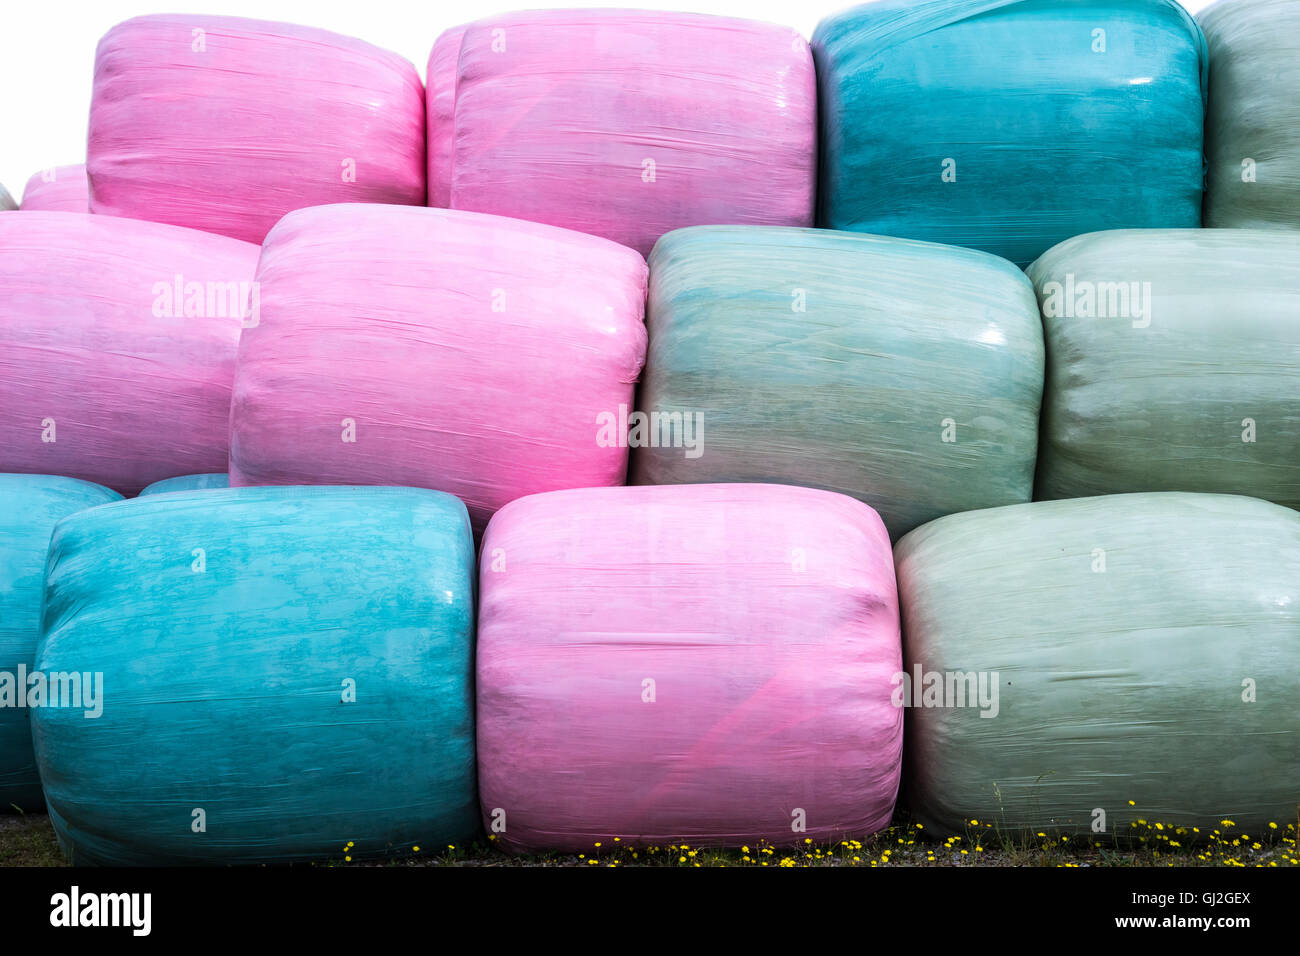 Stack of pink, blue and green silage bags Stock Photo